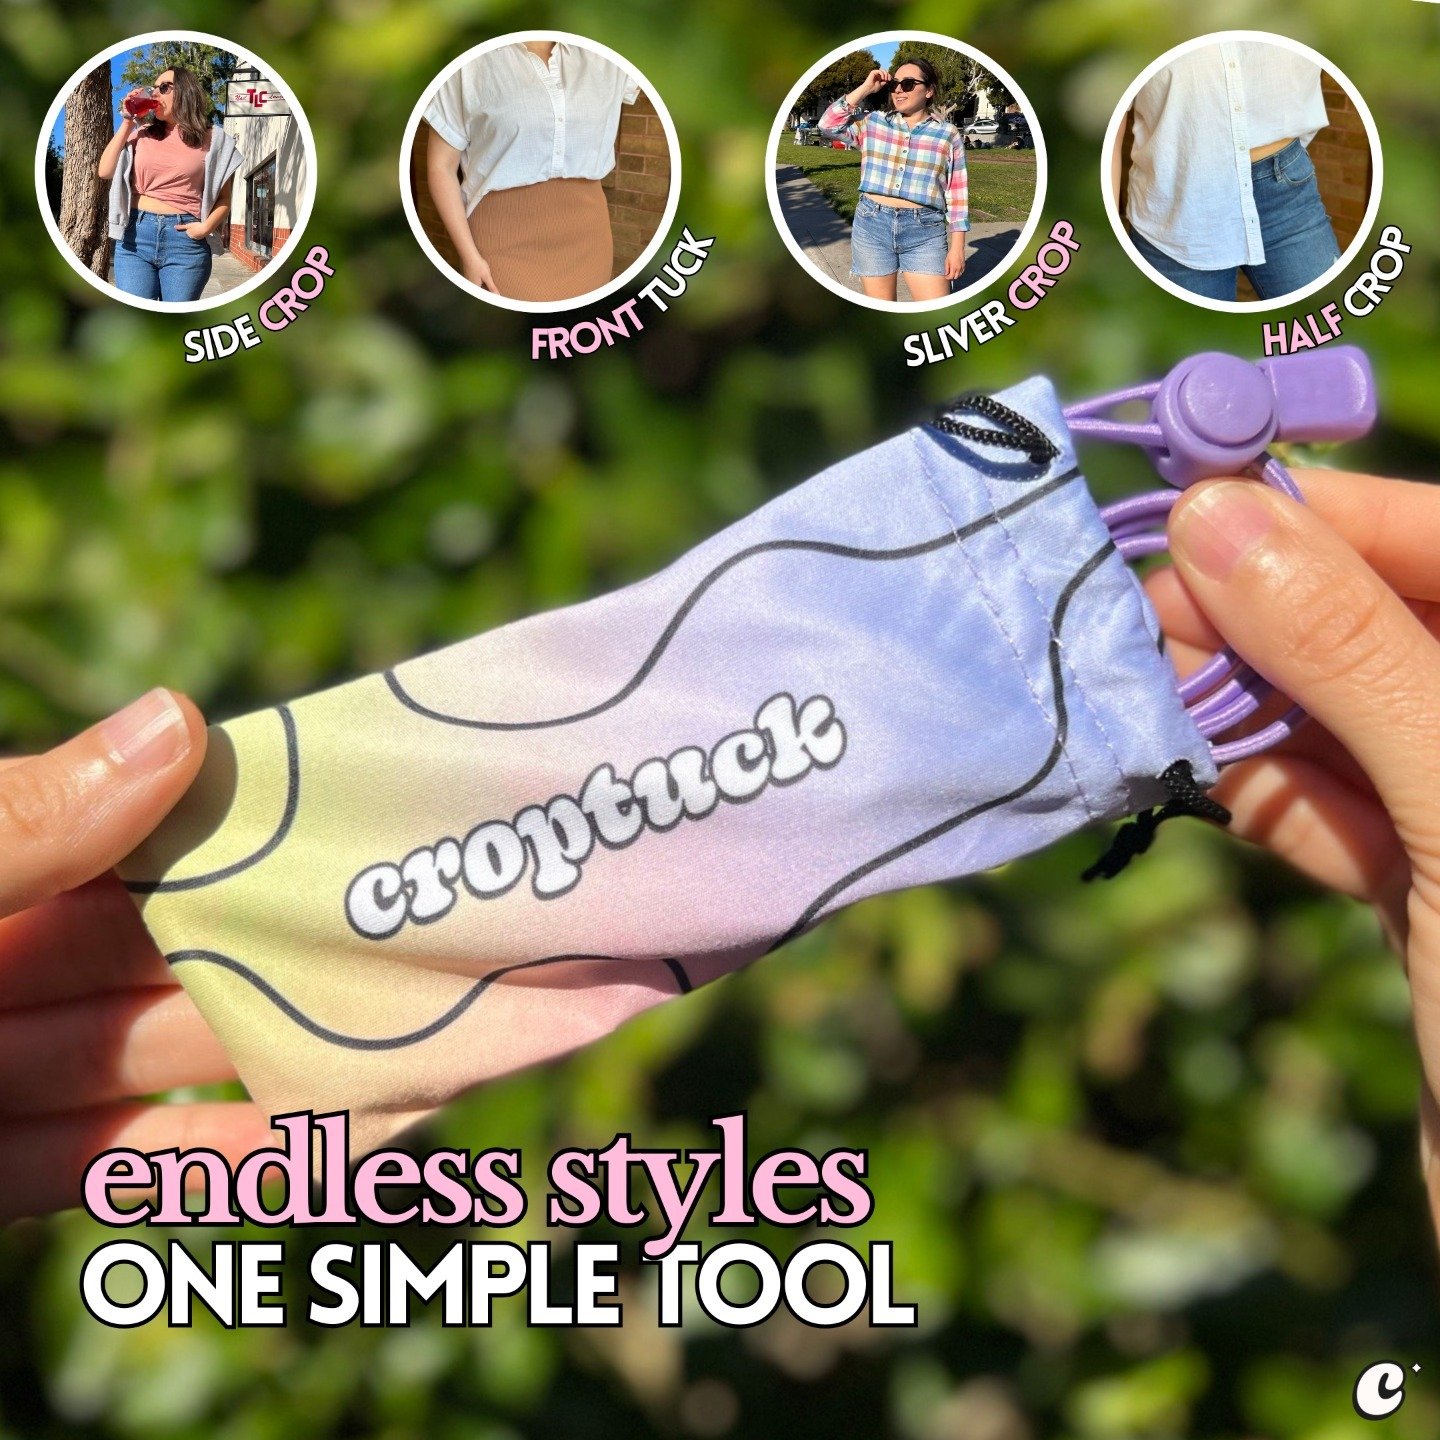 Endless styles, one simple tool! ✨

Croptuck is a comfortable, lightweight, and adjustable elastic band worn around your waist. Whether you want a chic tucked look or a temporary crop, Croptuck has you covered. 🩷

What's your favorite Croptuck look?